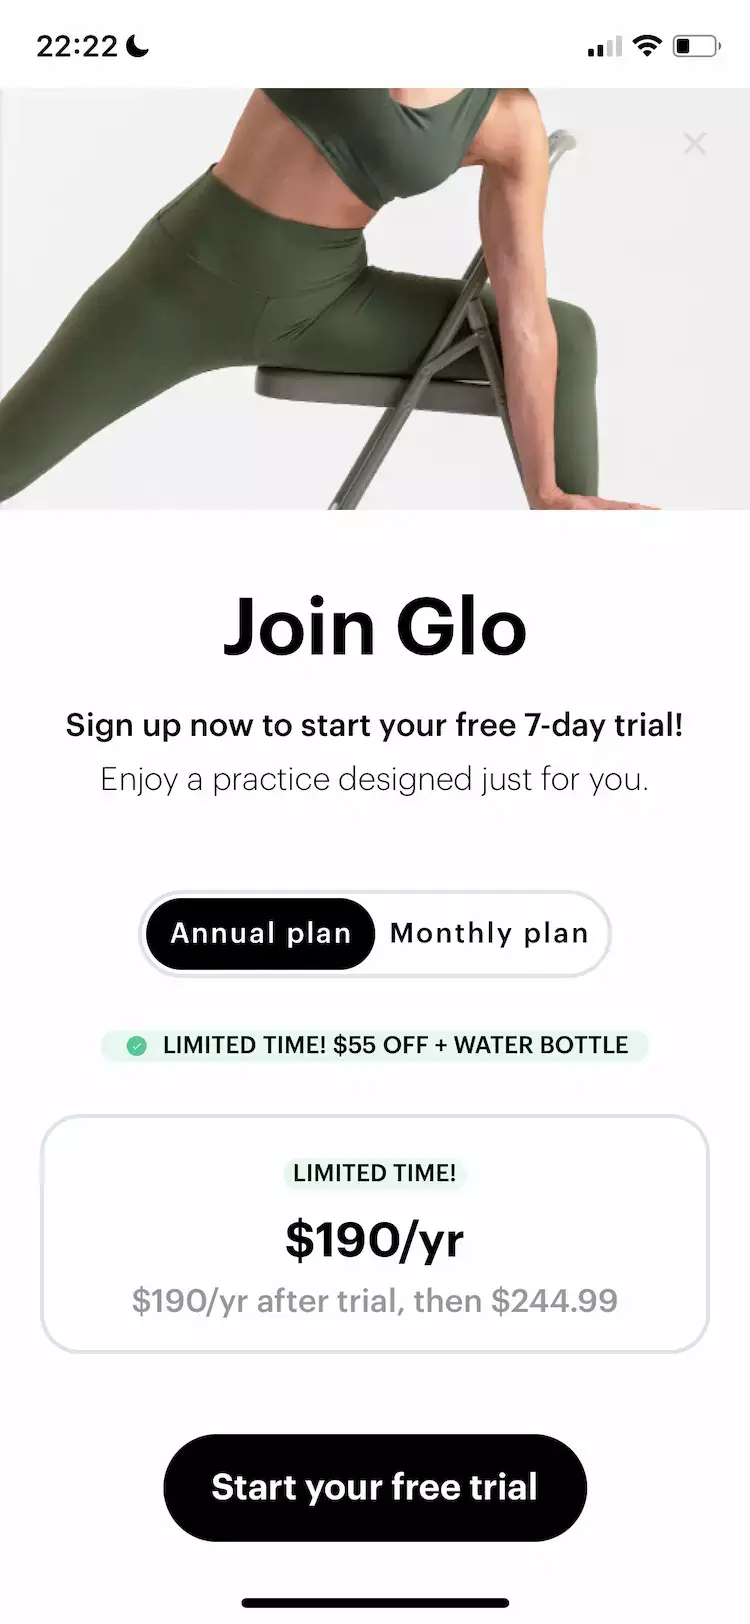 A mobile paywall design example by Glo | Yoga and Meditation App from the Health & Fitness category